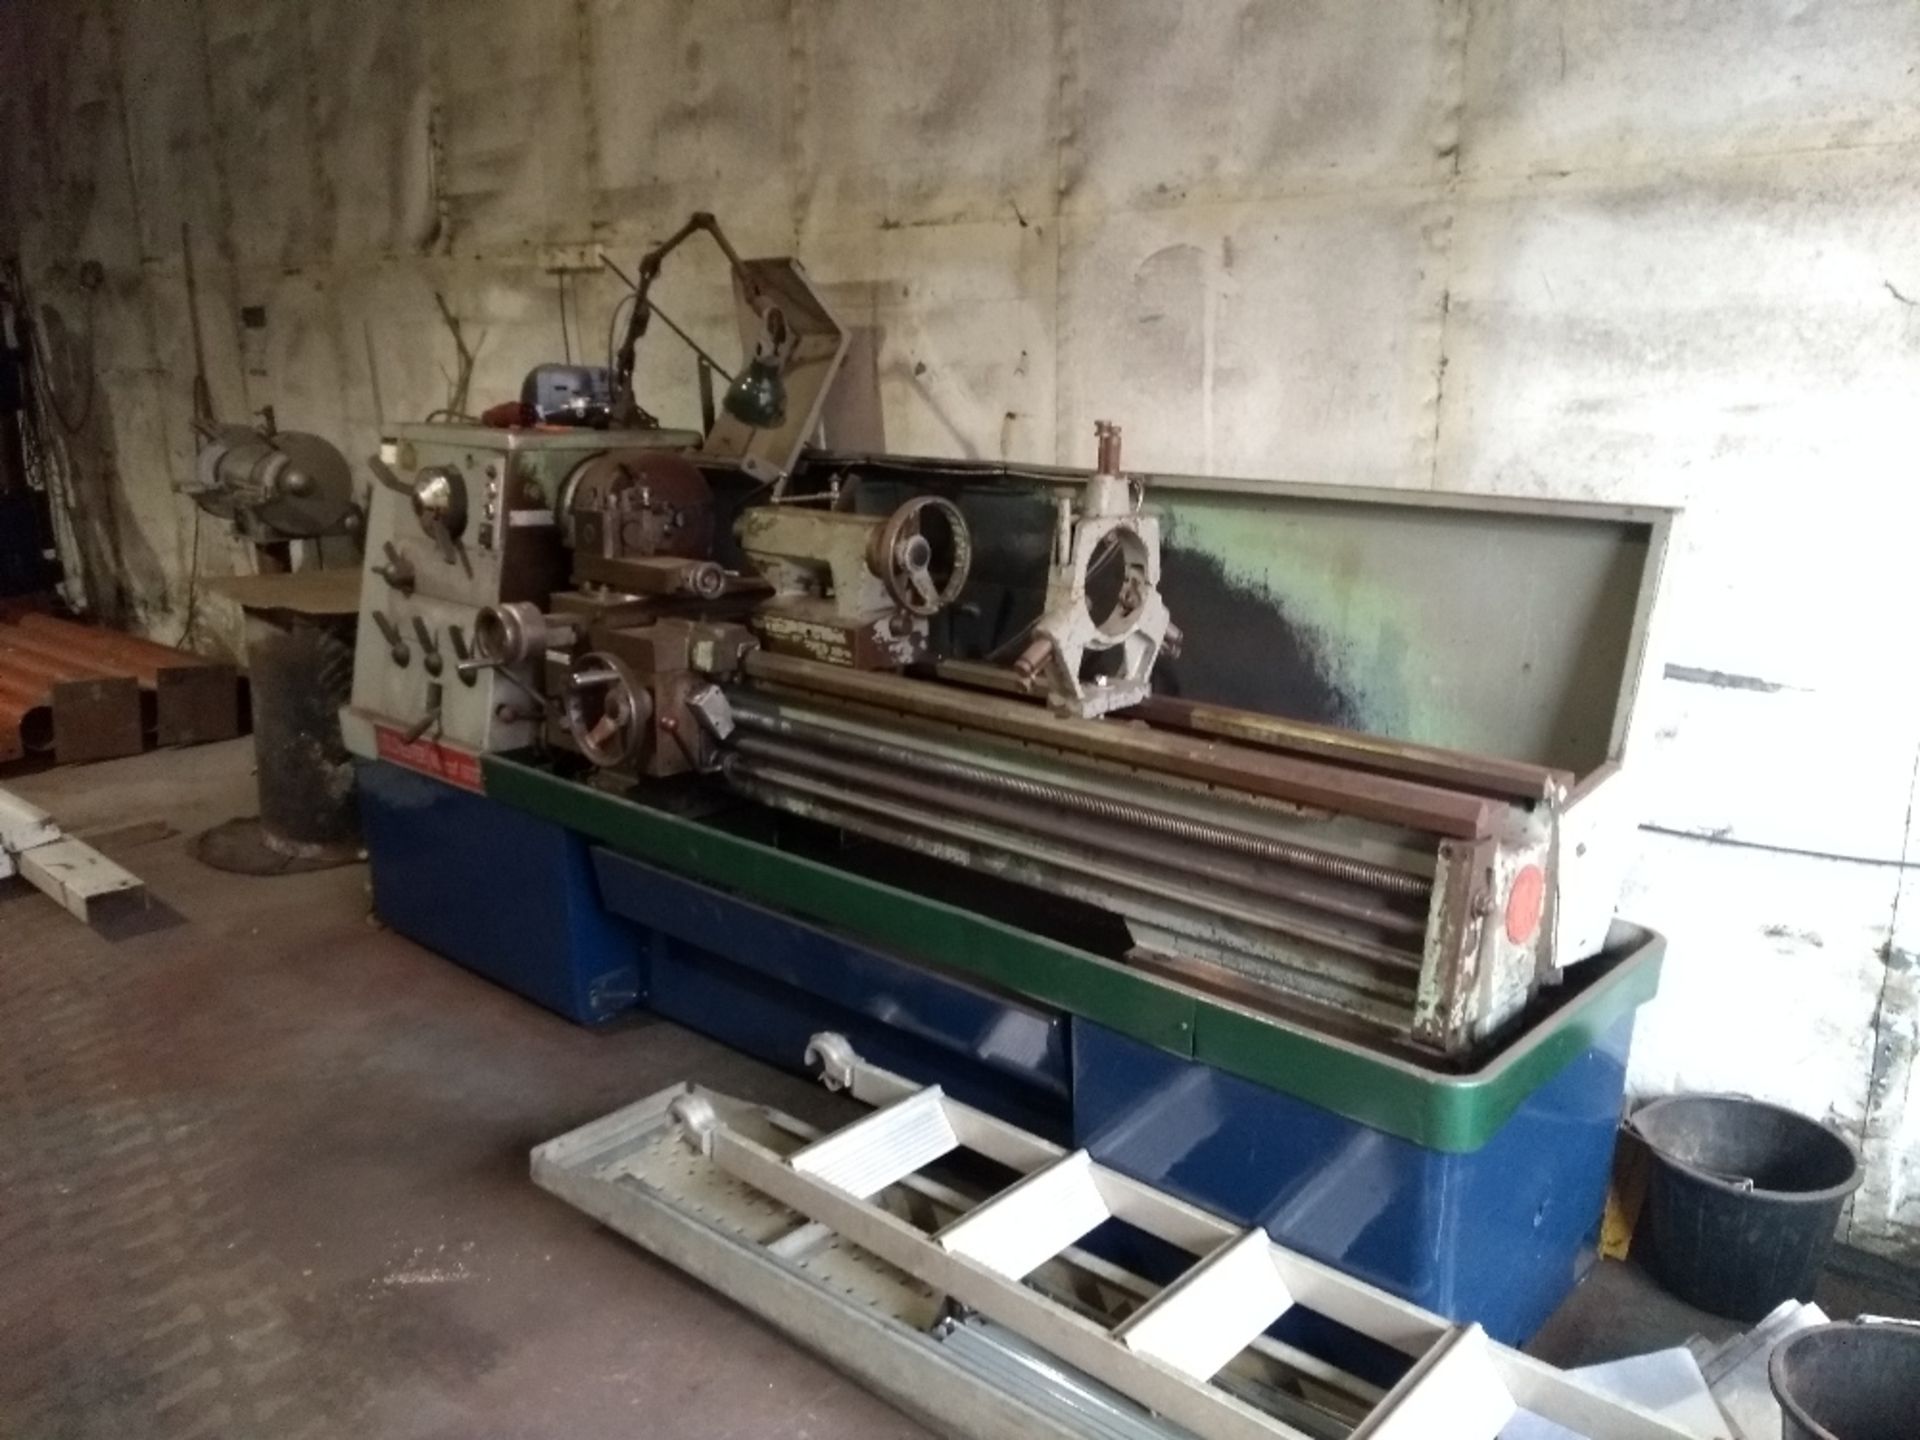 Colchester Mascot 1600 L50 Engineering Lathe - Ref W15903, 3 phase. - Image 2 of 2